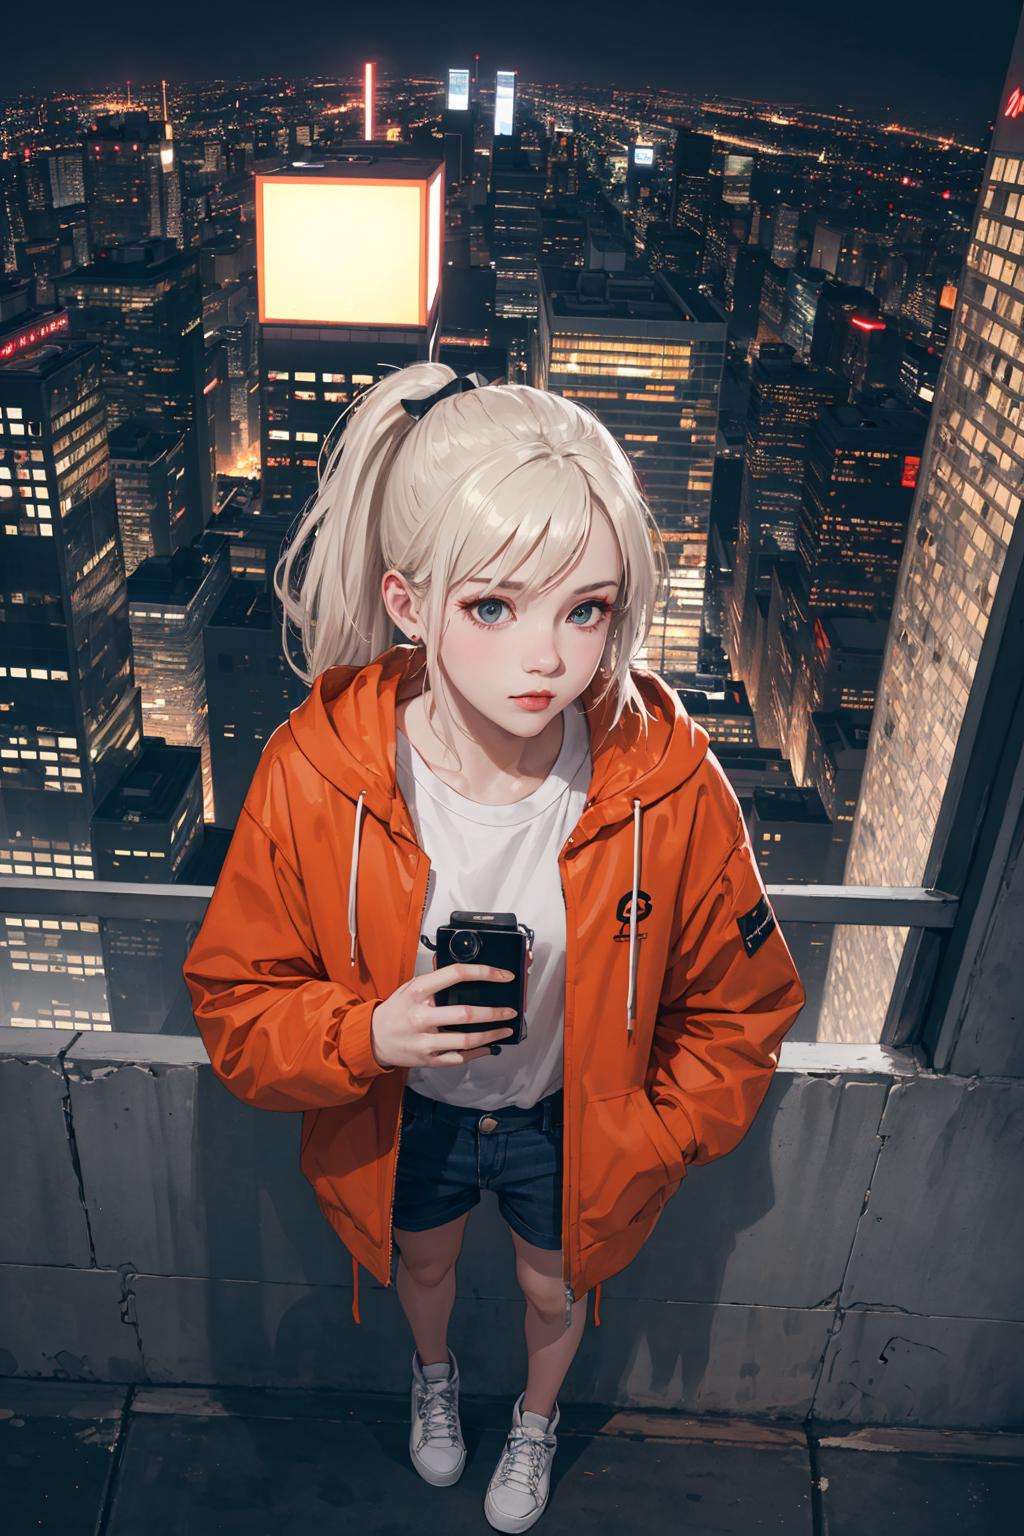 realistic, best quality, 8k uhd, dslr, soft lighting, high quality, film grain, Fujifilm XT3,(close up, from directly above), Edgy girl, dark orange jacket, white sneaker, platinum blonde hair color, ponytail, dramatic makeup, piecing, (nighttime, dark city), neon signs, individuality, authenticity, creative expression,camera, computer, books, messy room, rooftop apartment